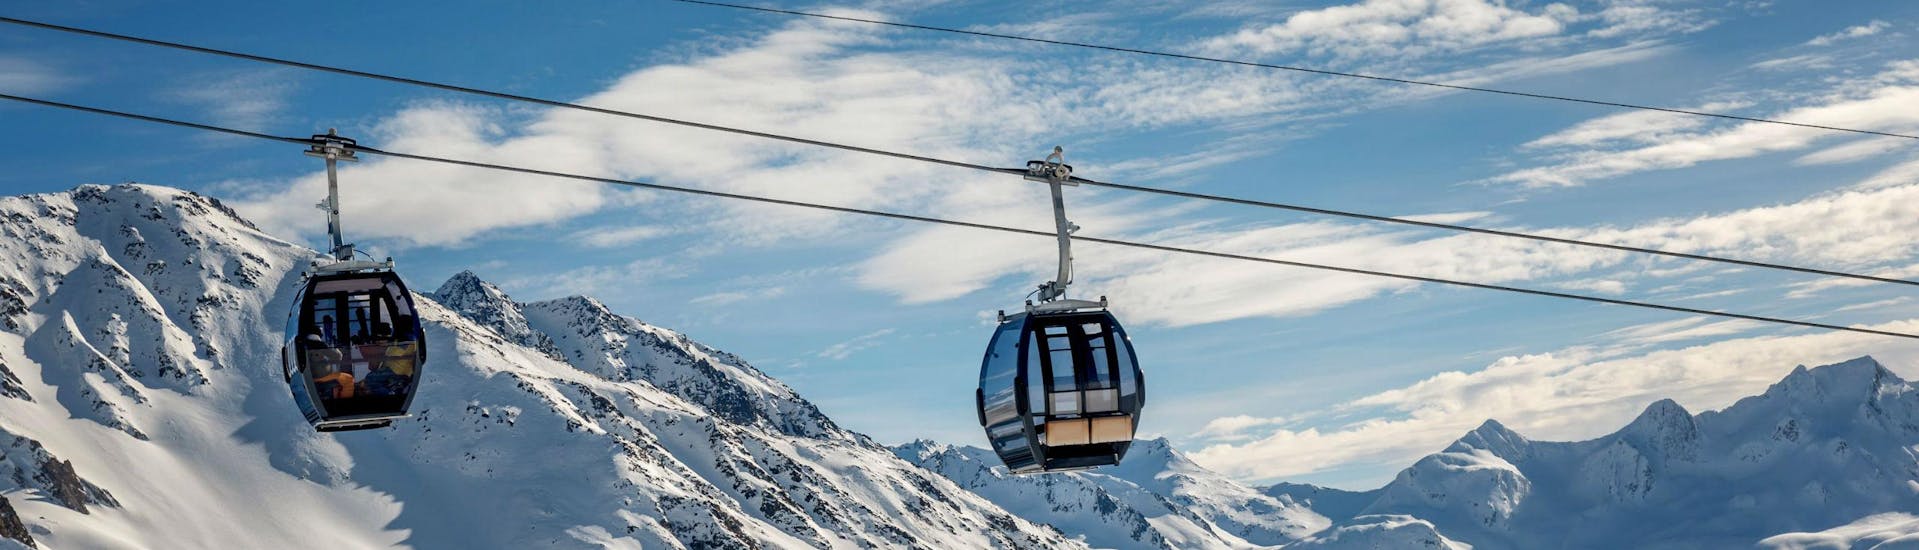 A view of the cable car carrying skiers up to the top of the mountain in the ski resort of Andermatt-Sedrun-Disentis, where local ski schools offer a selection of ski lessons.